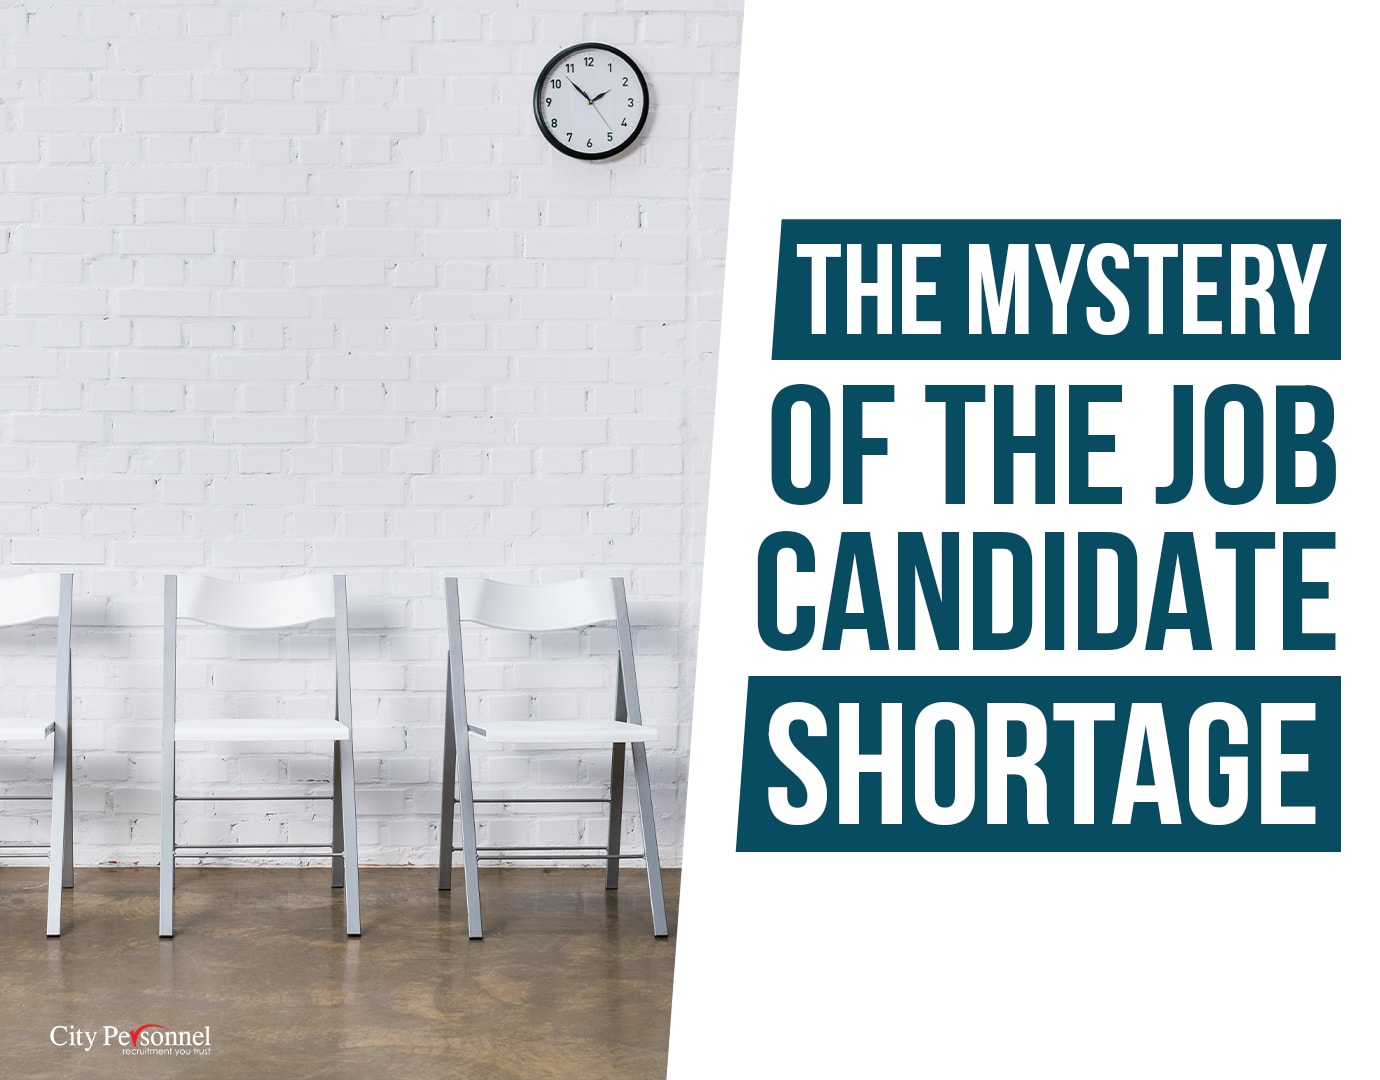 The Mystery of the Job Candidate Shortage